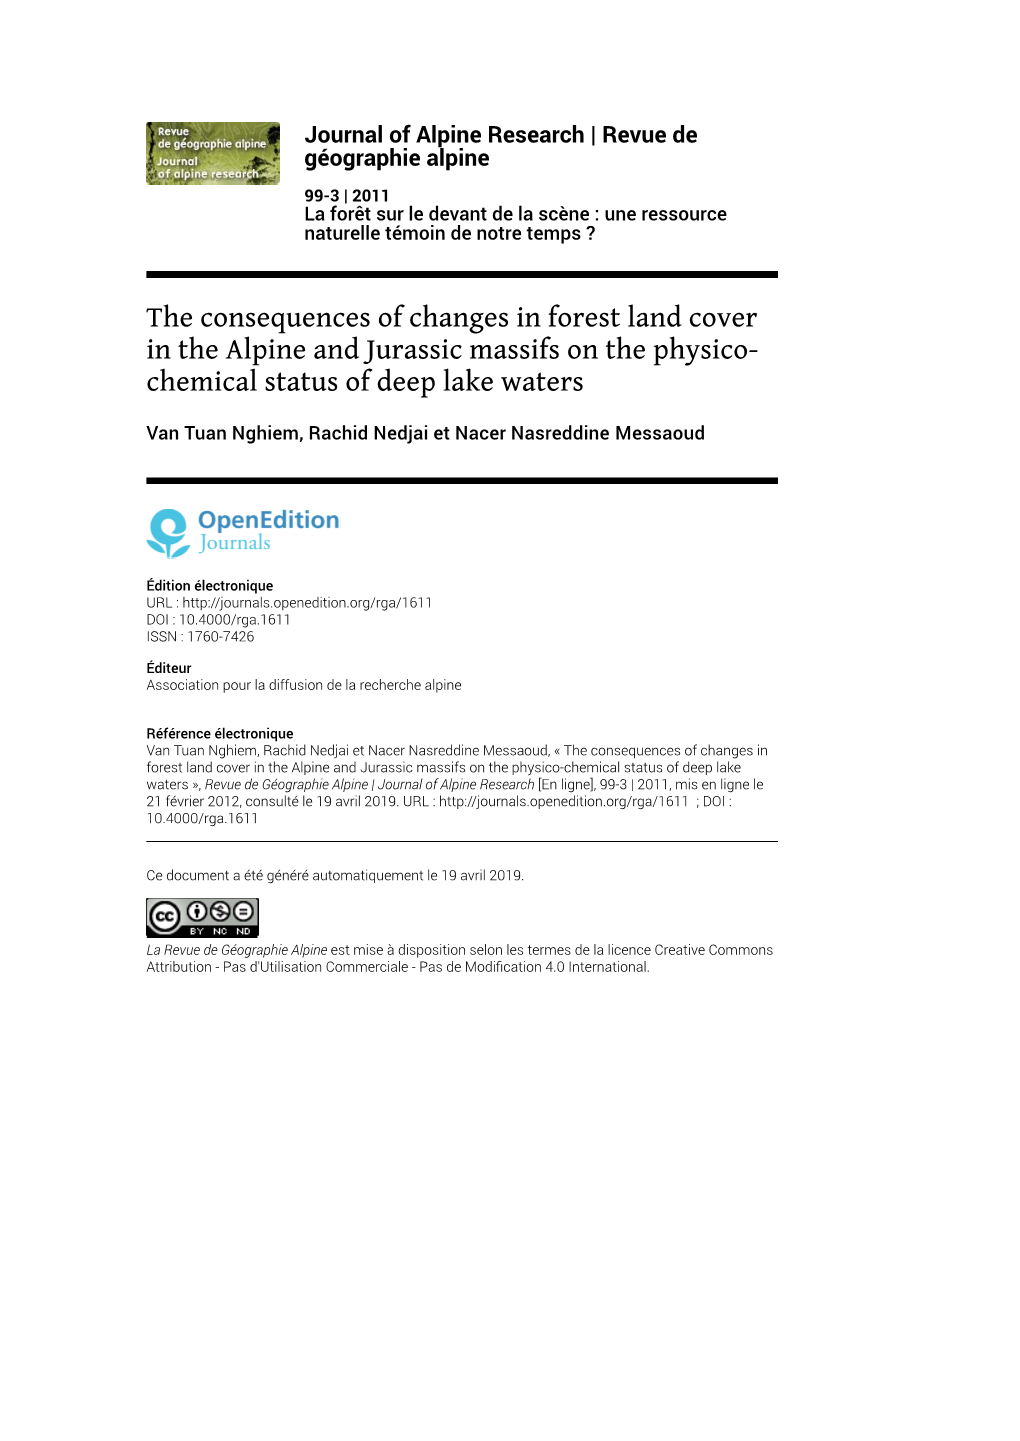 Journal of Alpine Research | Revue De Géographie Alpine, 99-3 | 2011 the Consequences of Changes in Forest Land Cover in the Alpine and Jurassic M